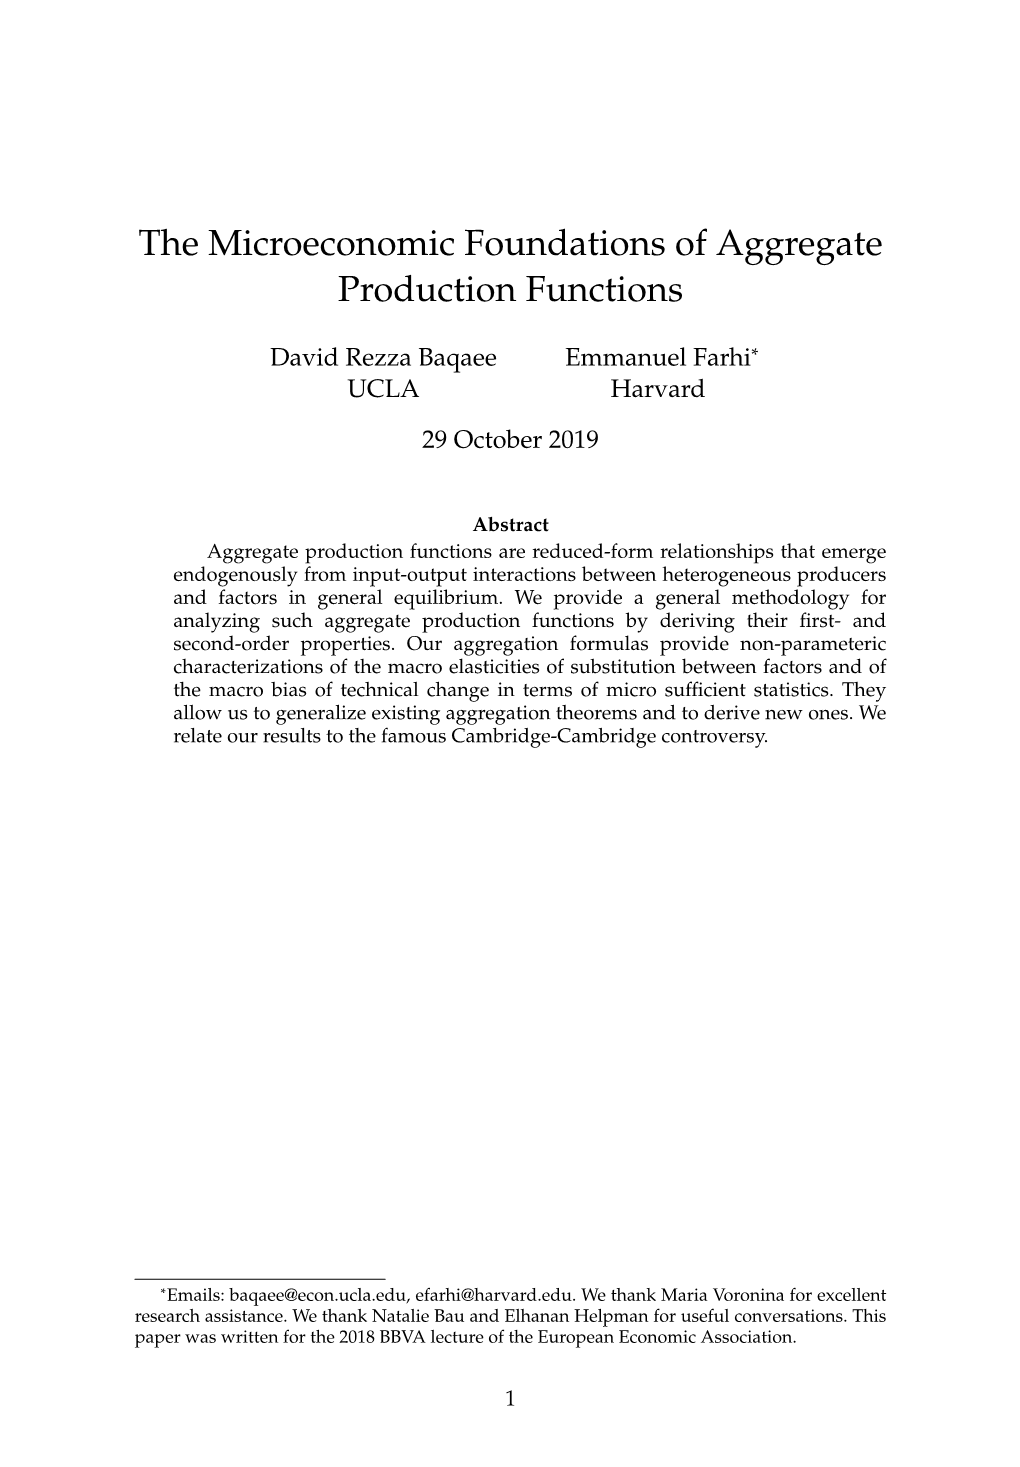 The Microeconomic Foundations of Aggregate Production Functions